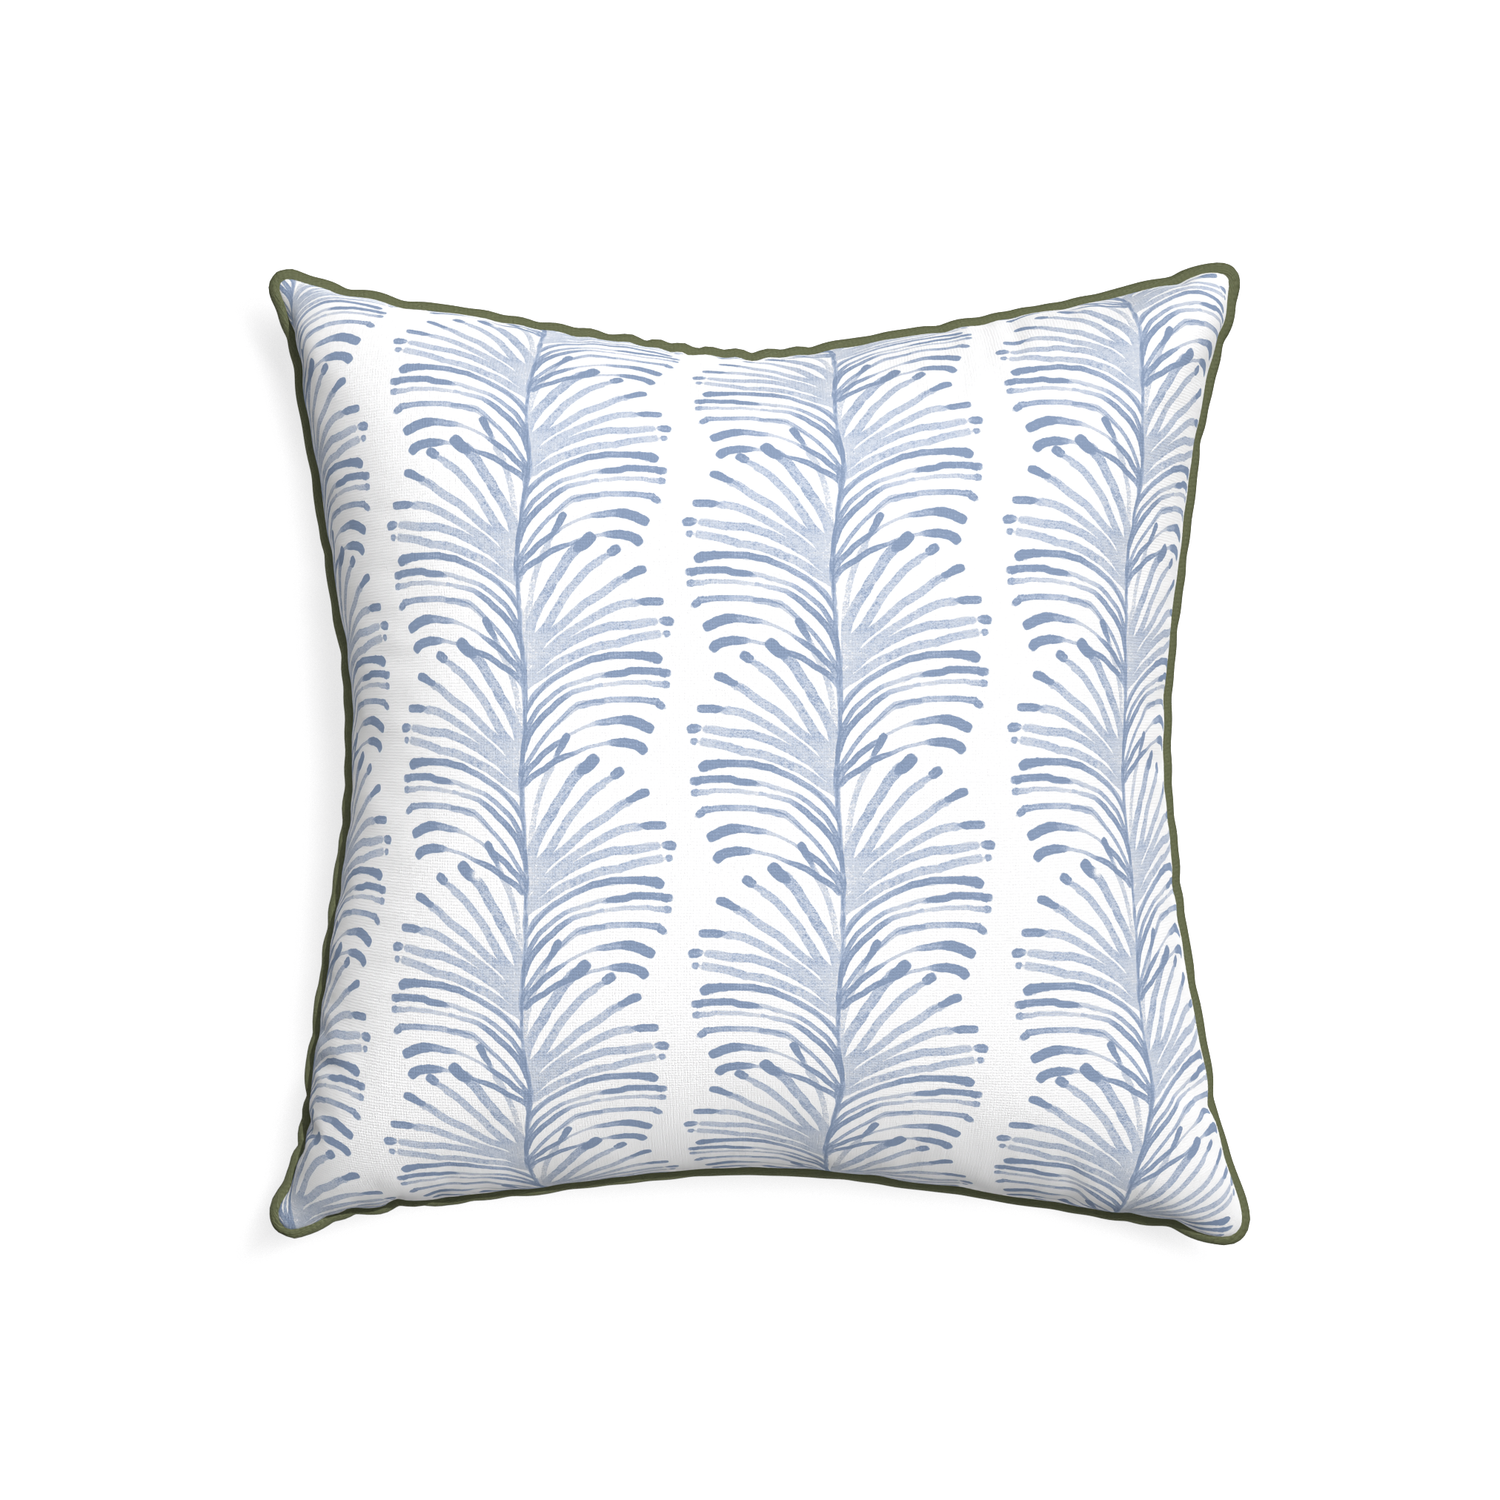 22-square emma sky custom pillow with f piping on white background